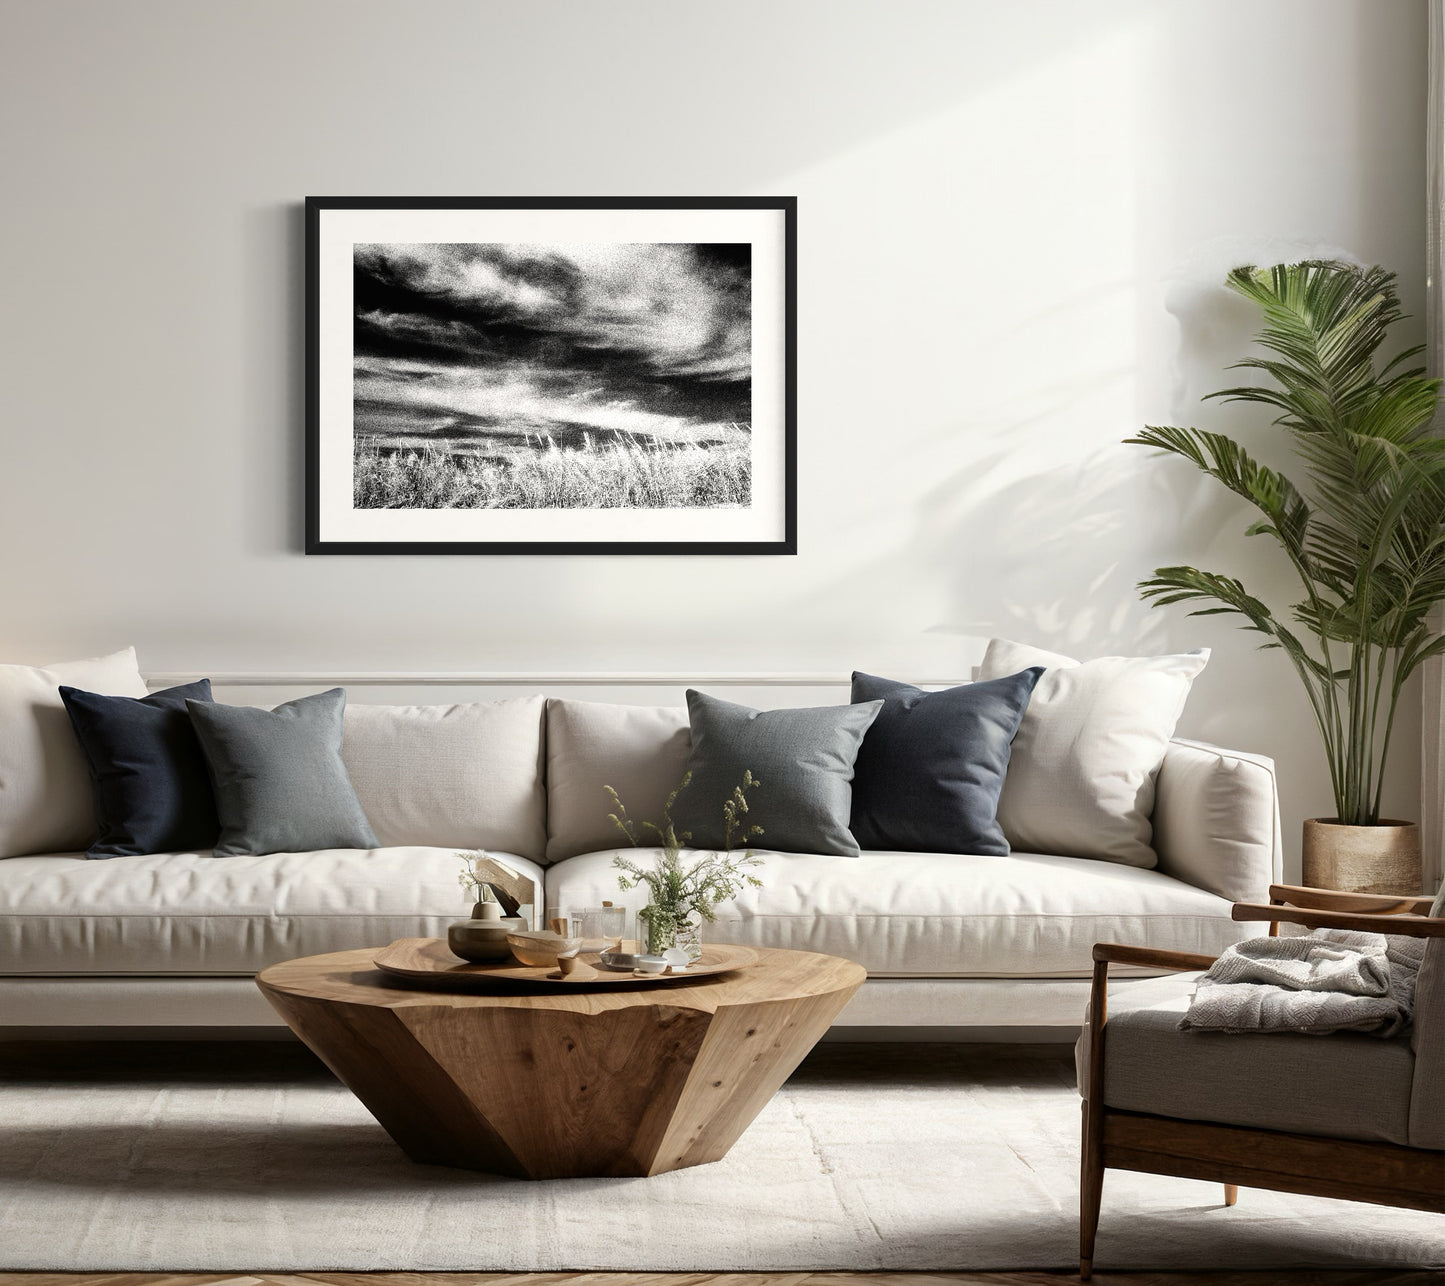 black and white photo of long clouds and plants with stalks in the foreground in black frame with white matte above sofa in relaxed, nature toned living room